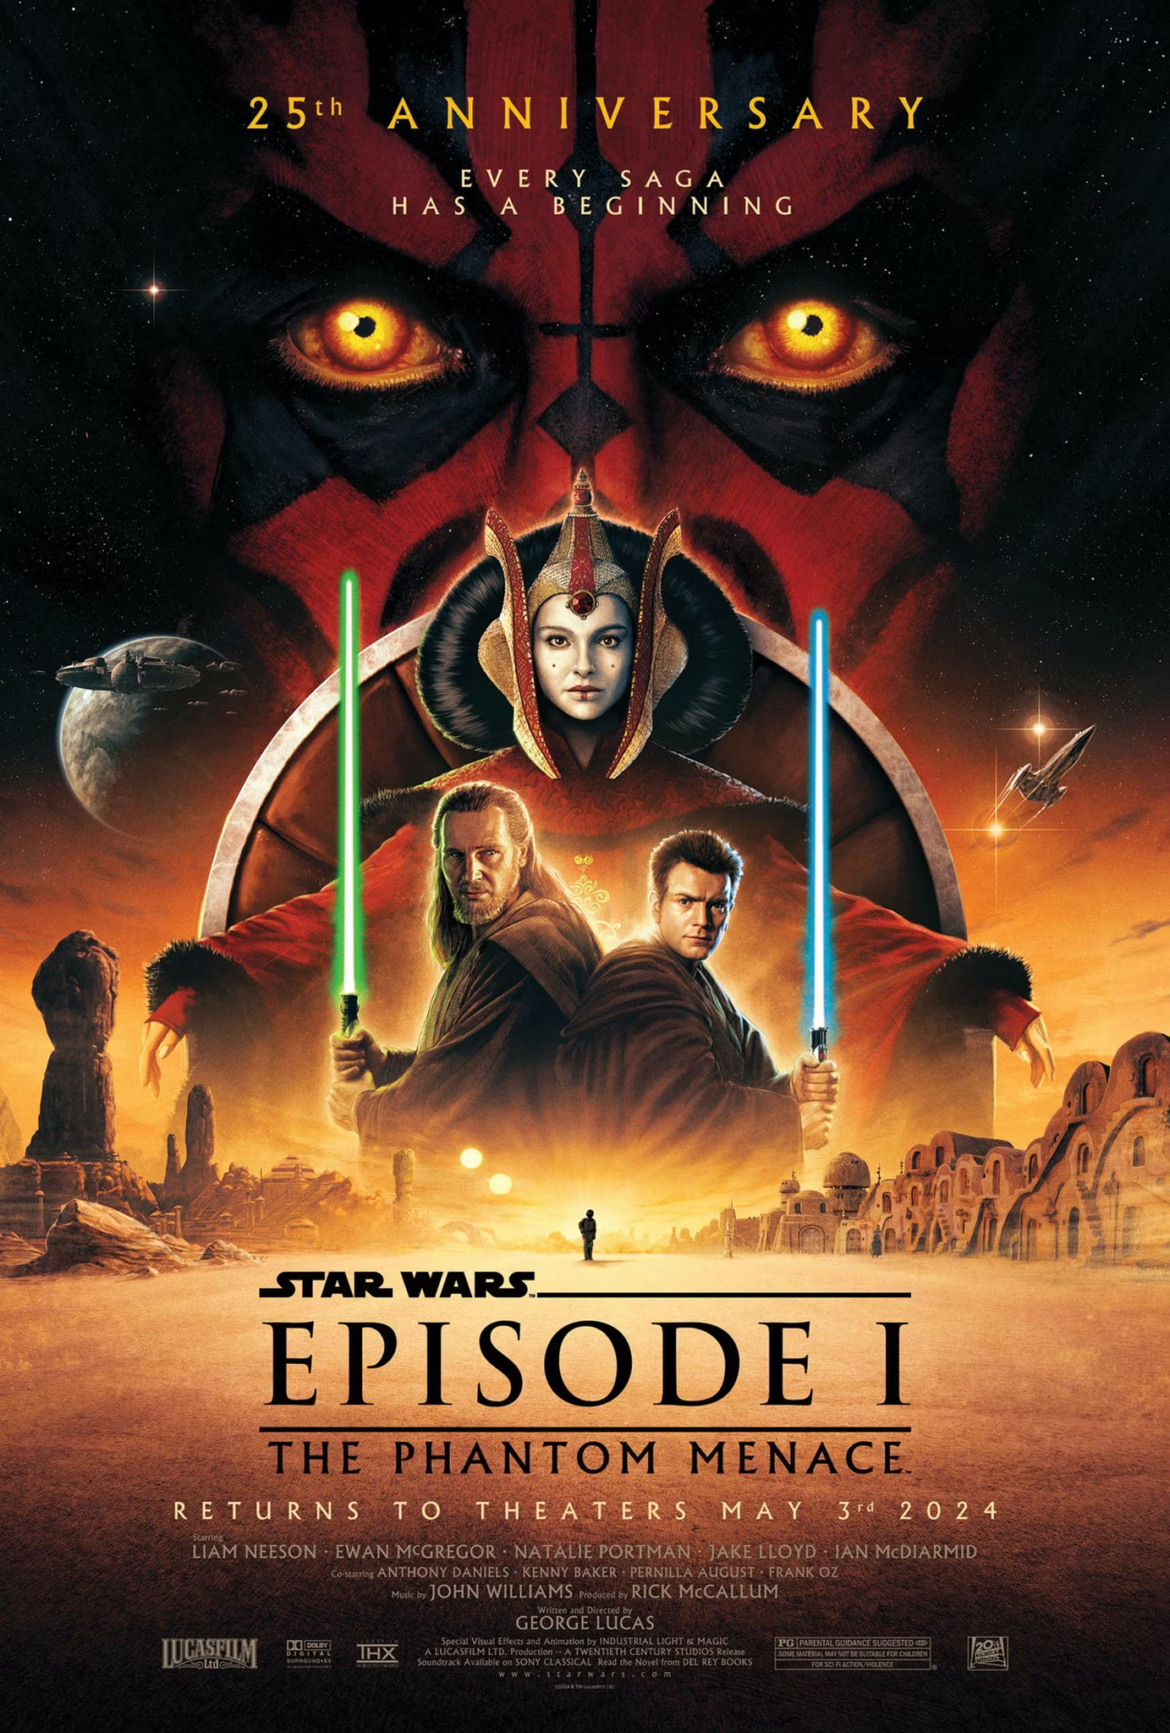 Star Wars: Episode I The Phantom Menace Returning to Theaters for 25th Anniversary